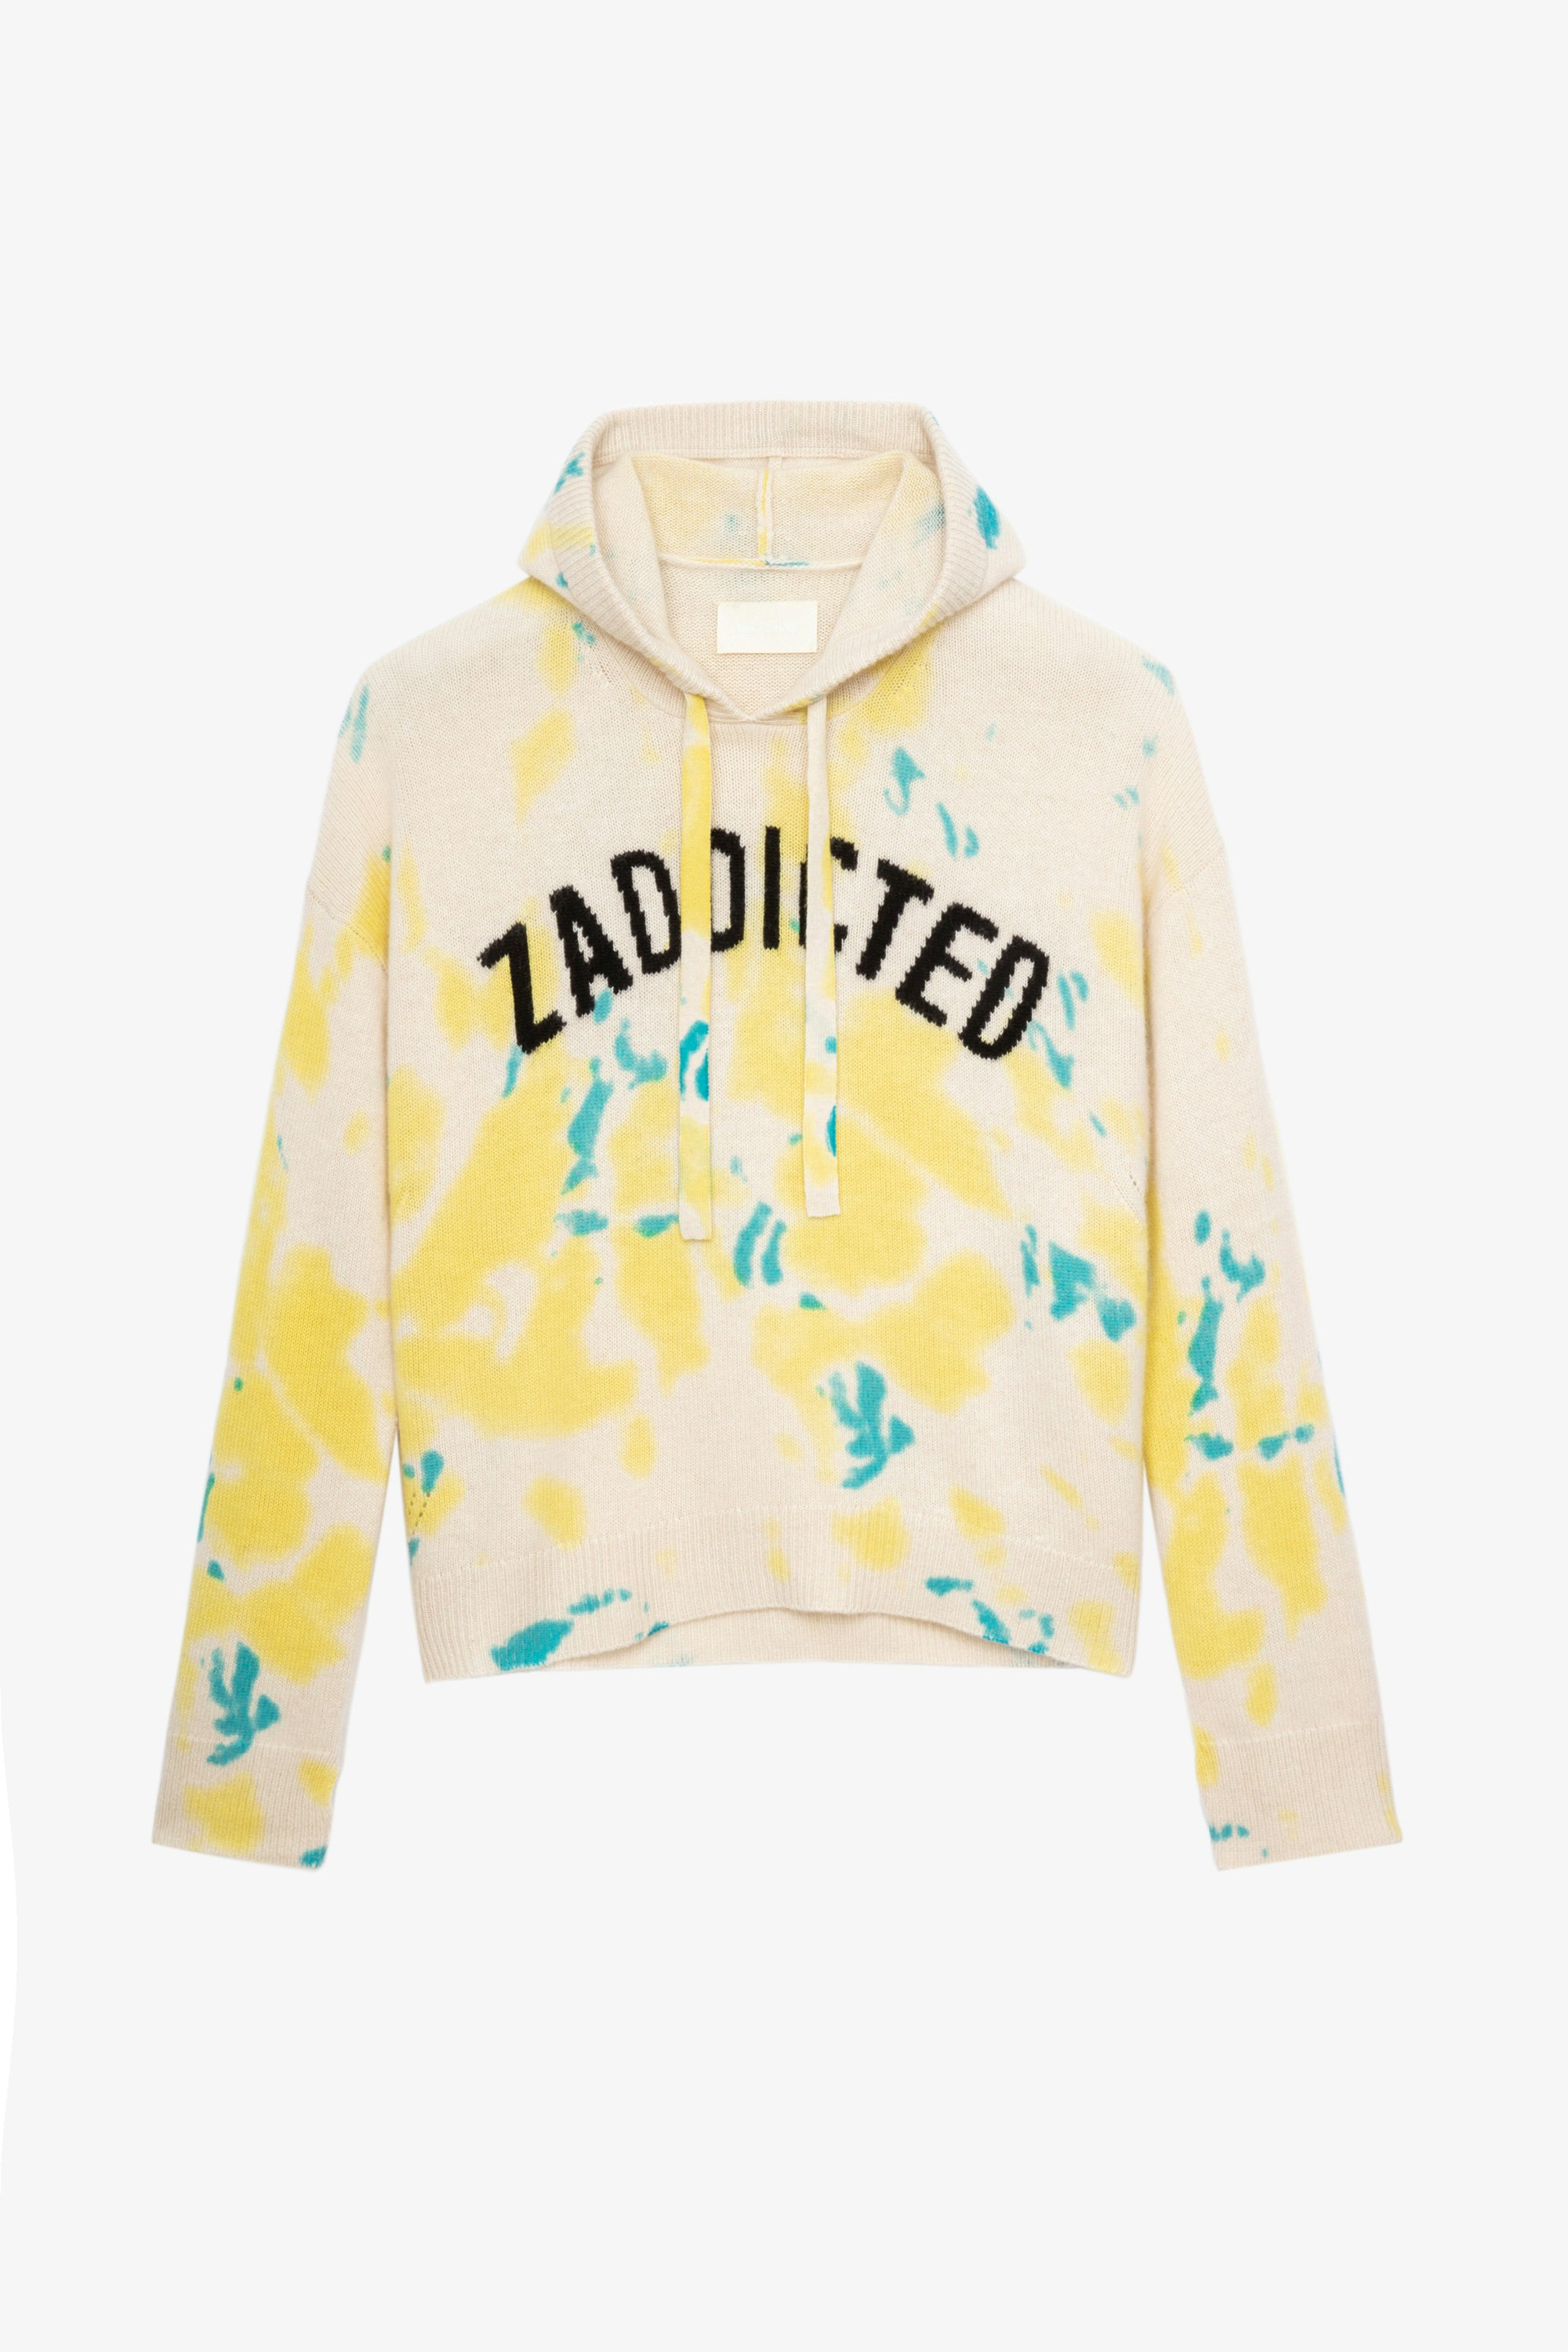 Marky Cashmere Jumper Women’s tie-dye cashmere hoodie with “Zaddicted” slogan